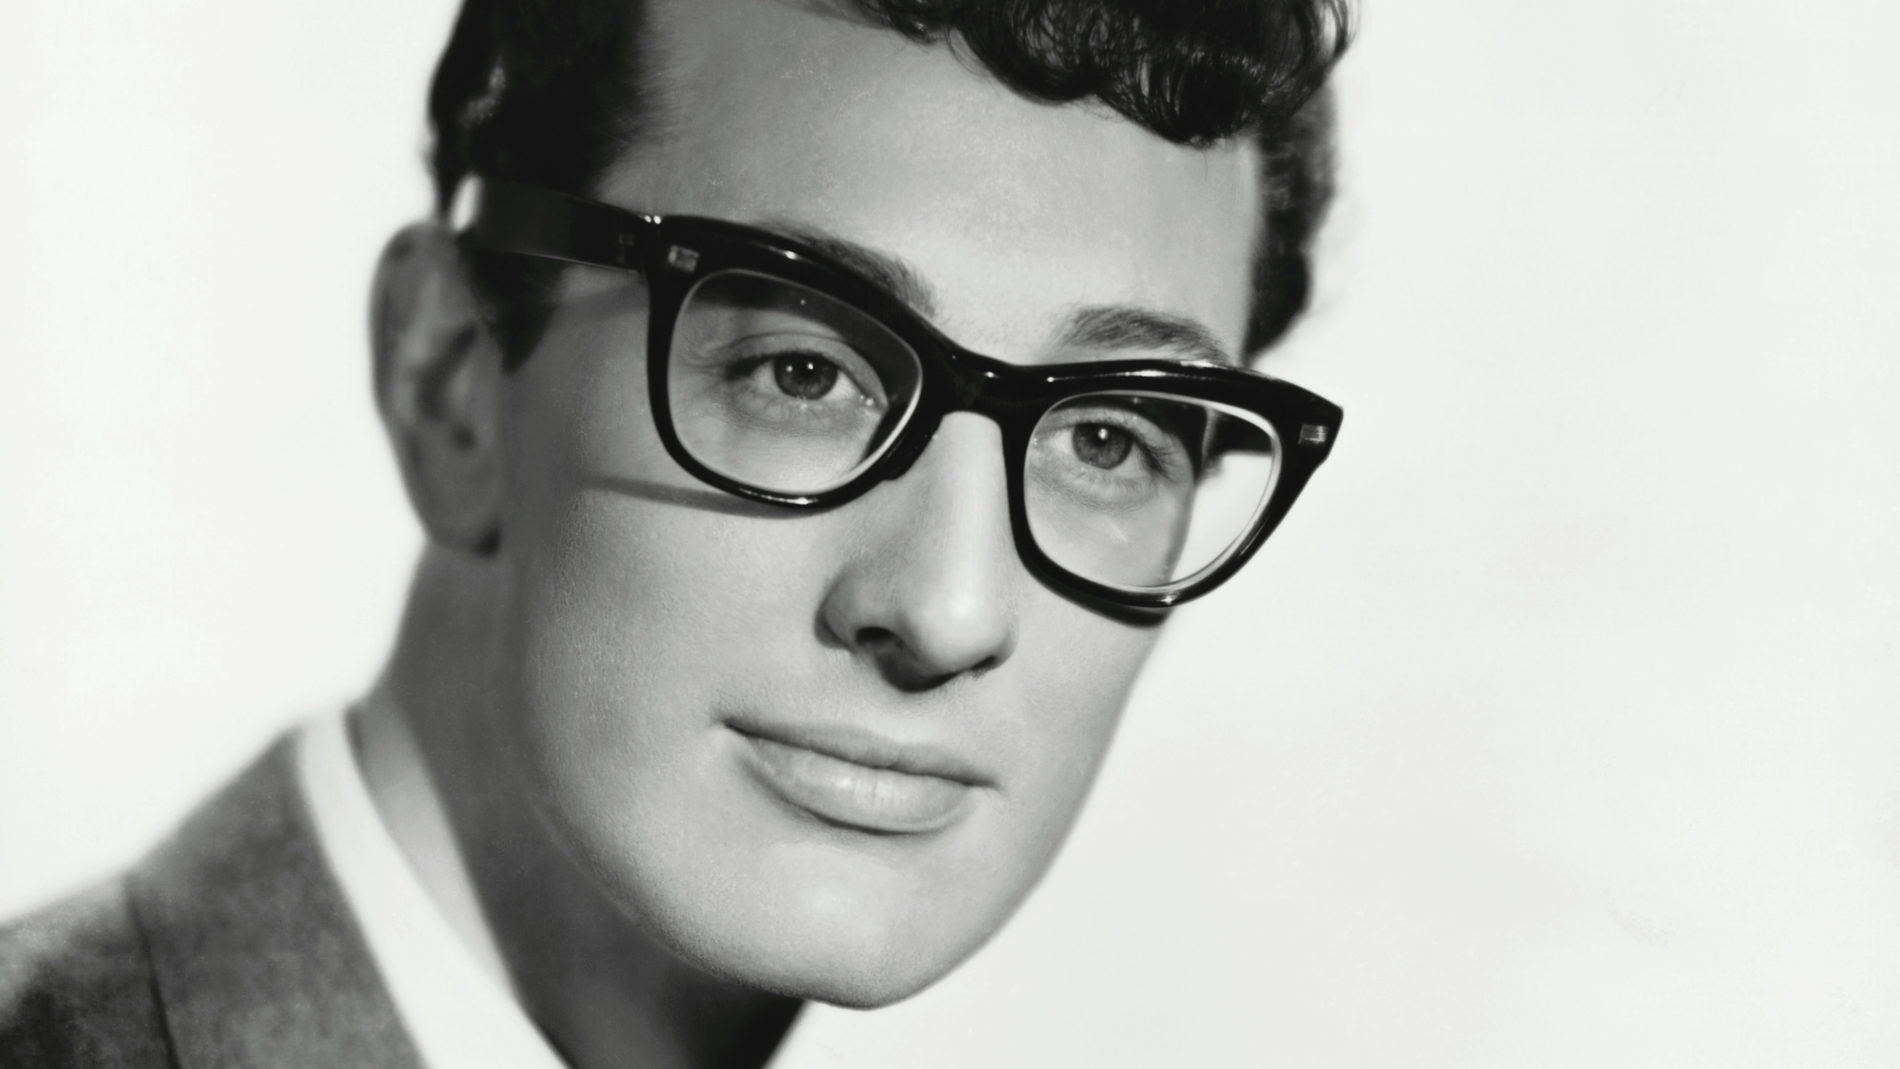 Buddy Holly & The Crickets - That'll Be The Day